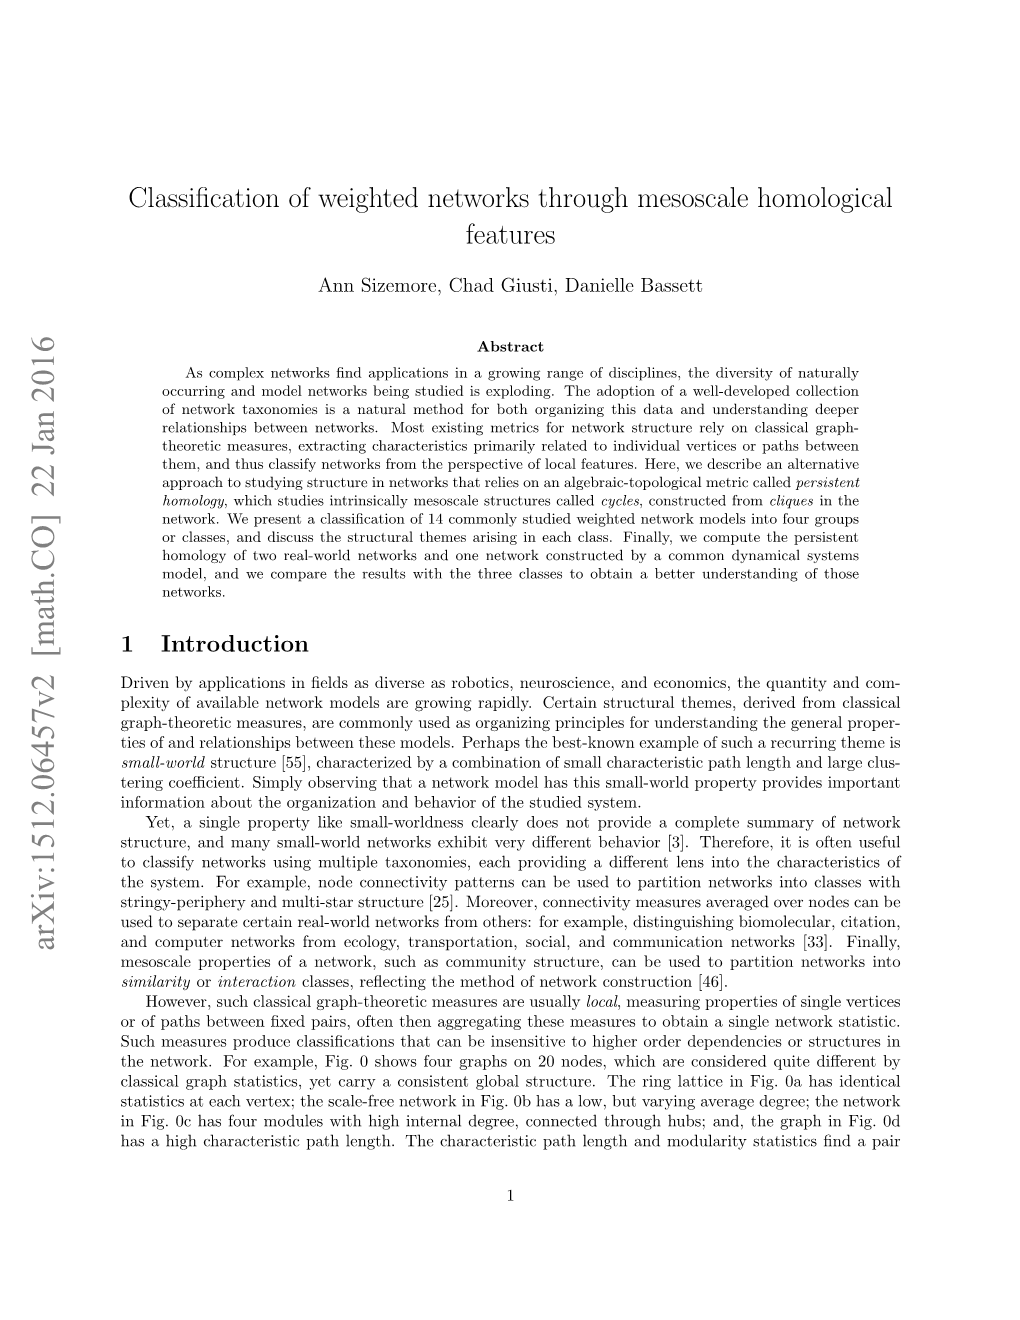 Classification of Weighted Networks Through Mesoscale Homological